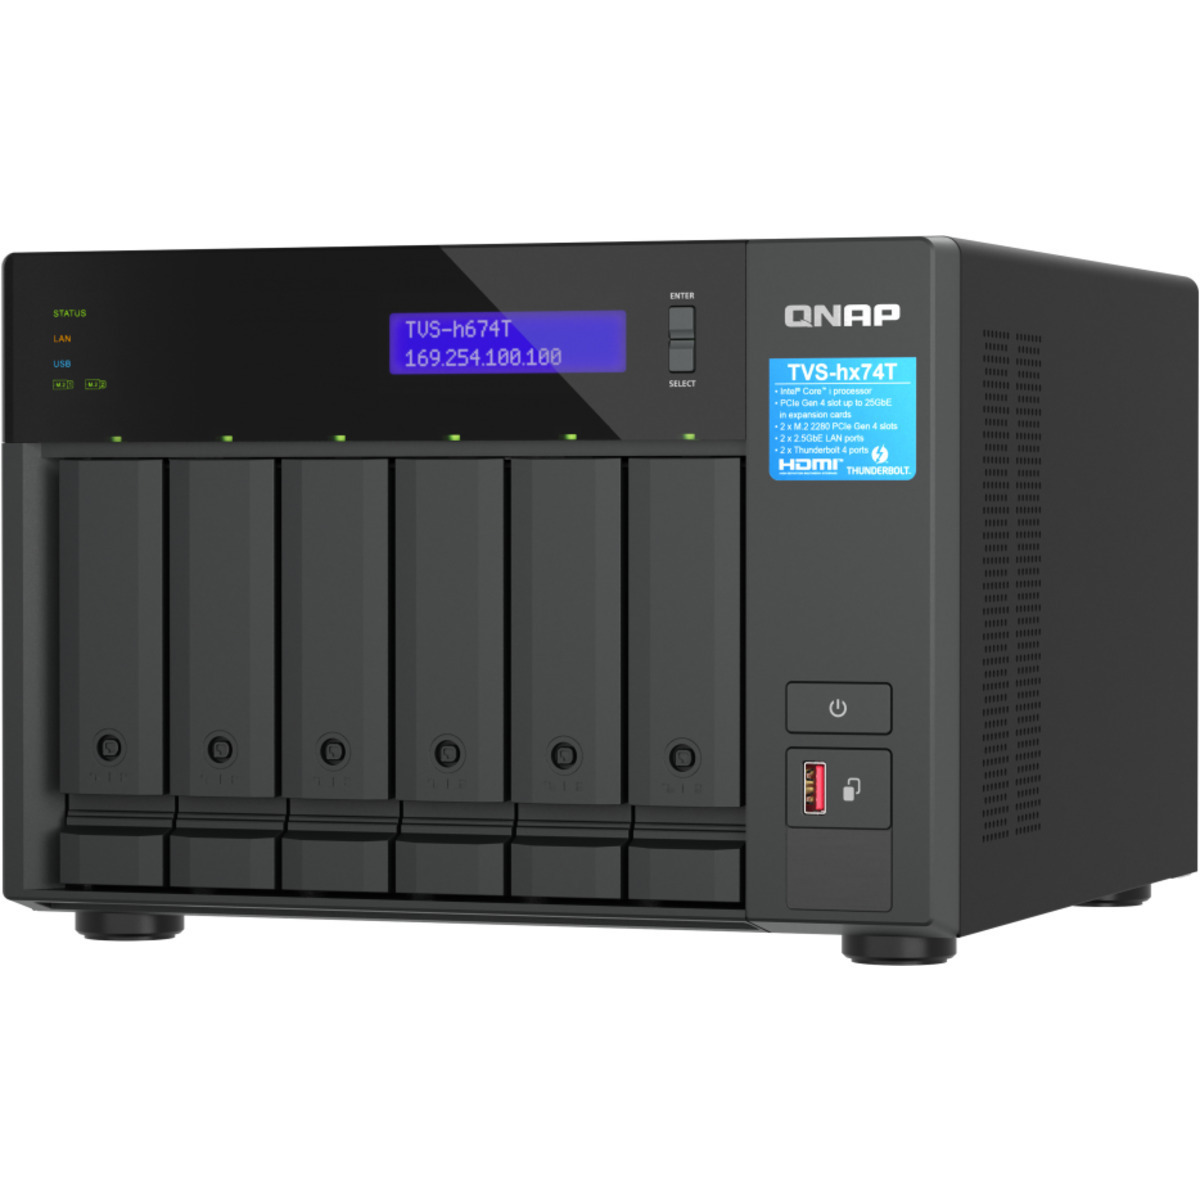 QNAP TVS-h674T Core i5 Thunderbolt 4 96tb 6-Bay Desktop Multimedia / Power User / Business DAS-NAS - Combo Direct + Network Storage Device 6x16tb Western Digital Red Pro WD161KFGX 3.5 7200rpm SATA 6Gb/s HDD NAS Class Drives Installed - Burn-In Tested TVS-h674T Core i5 Thunderbolt 4